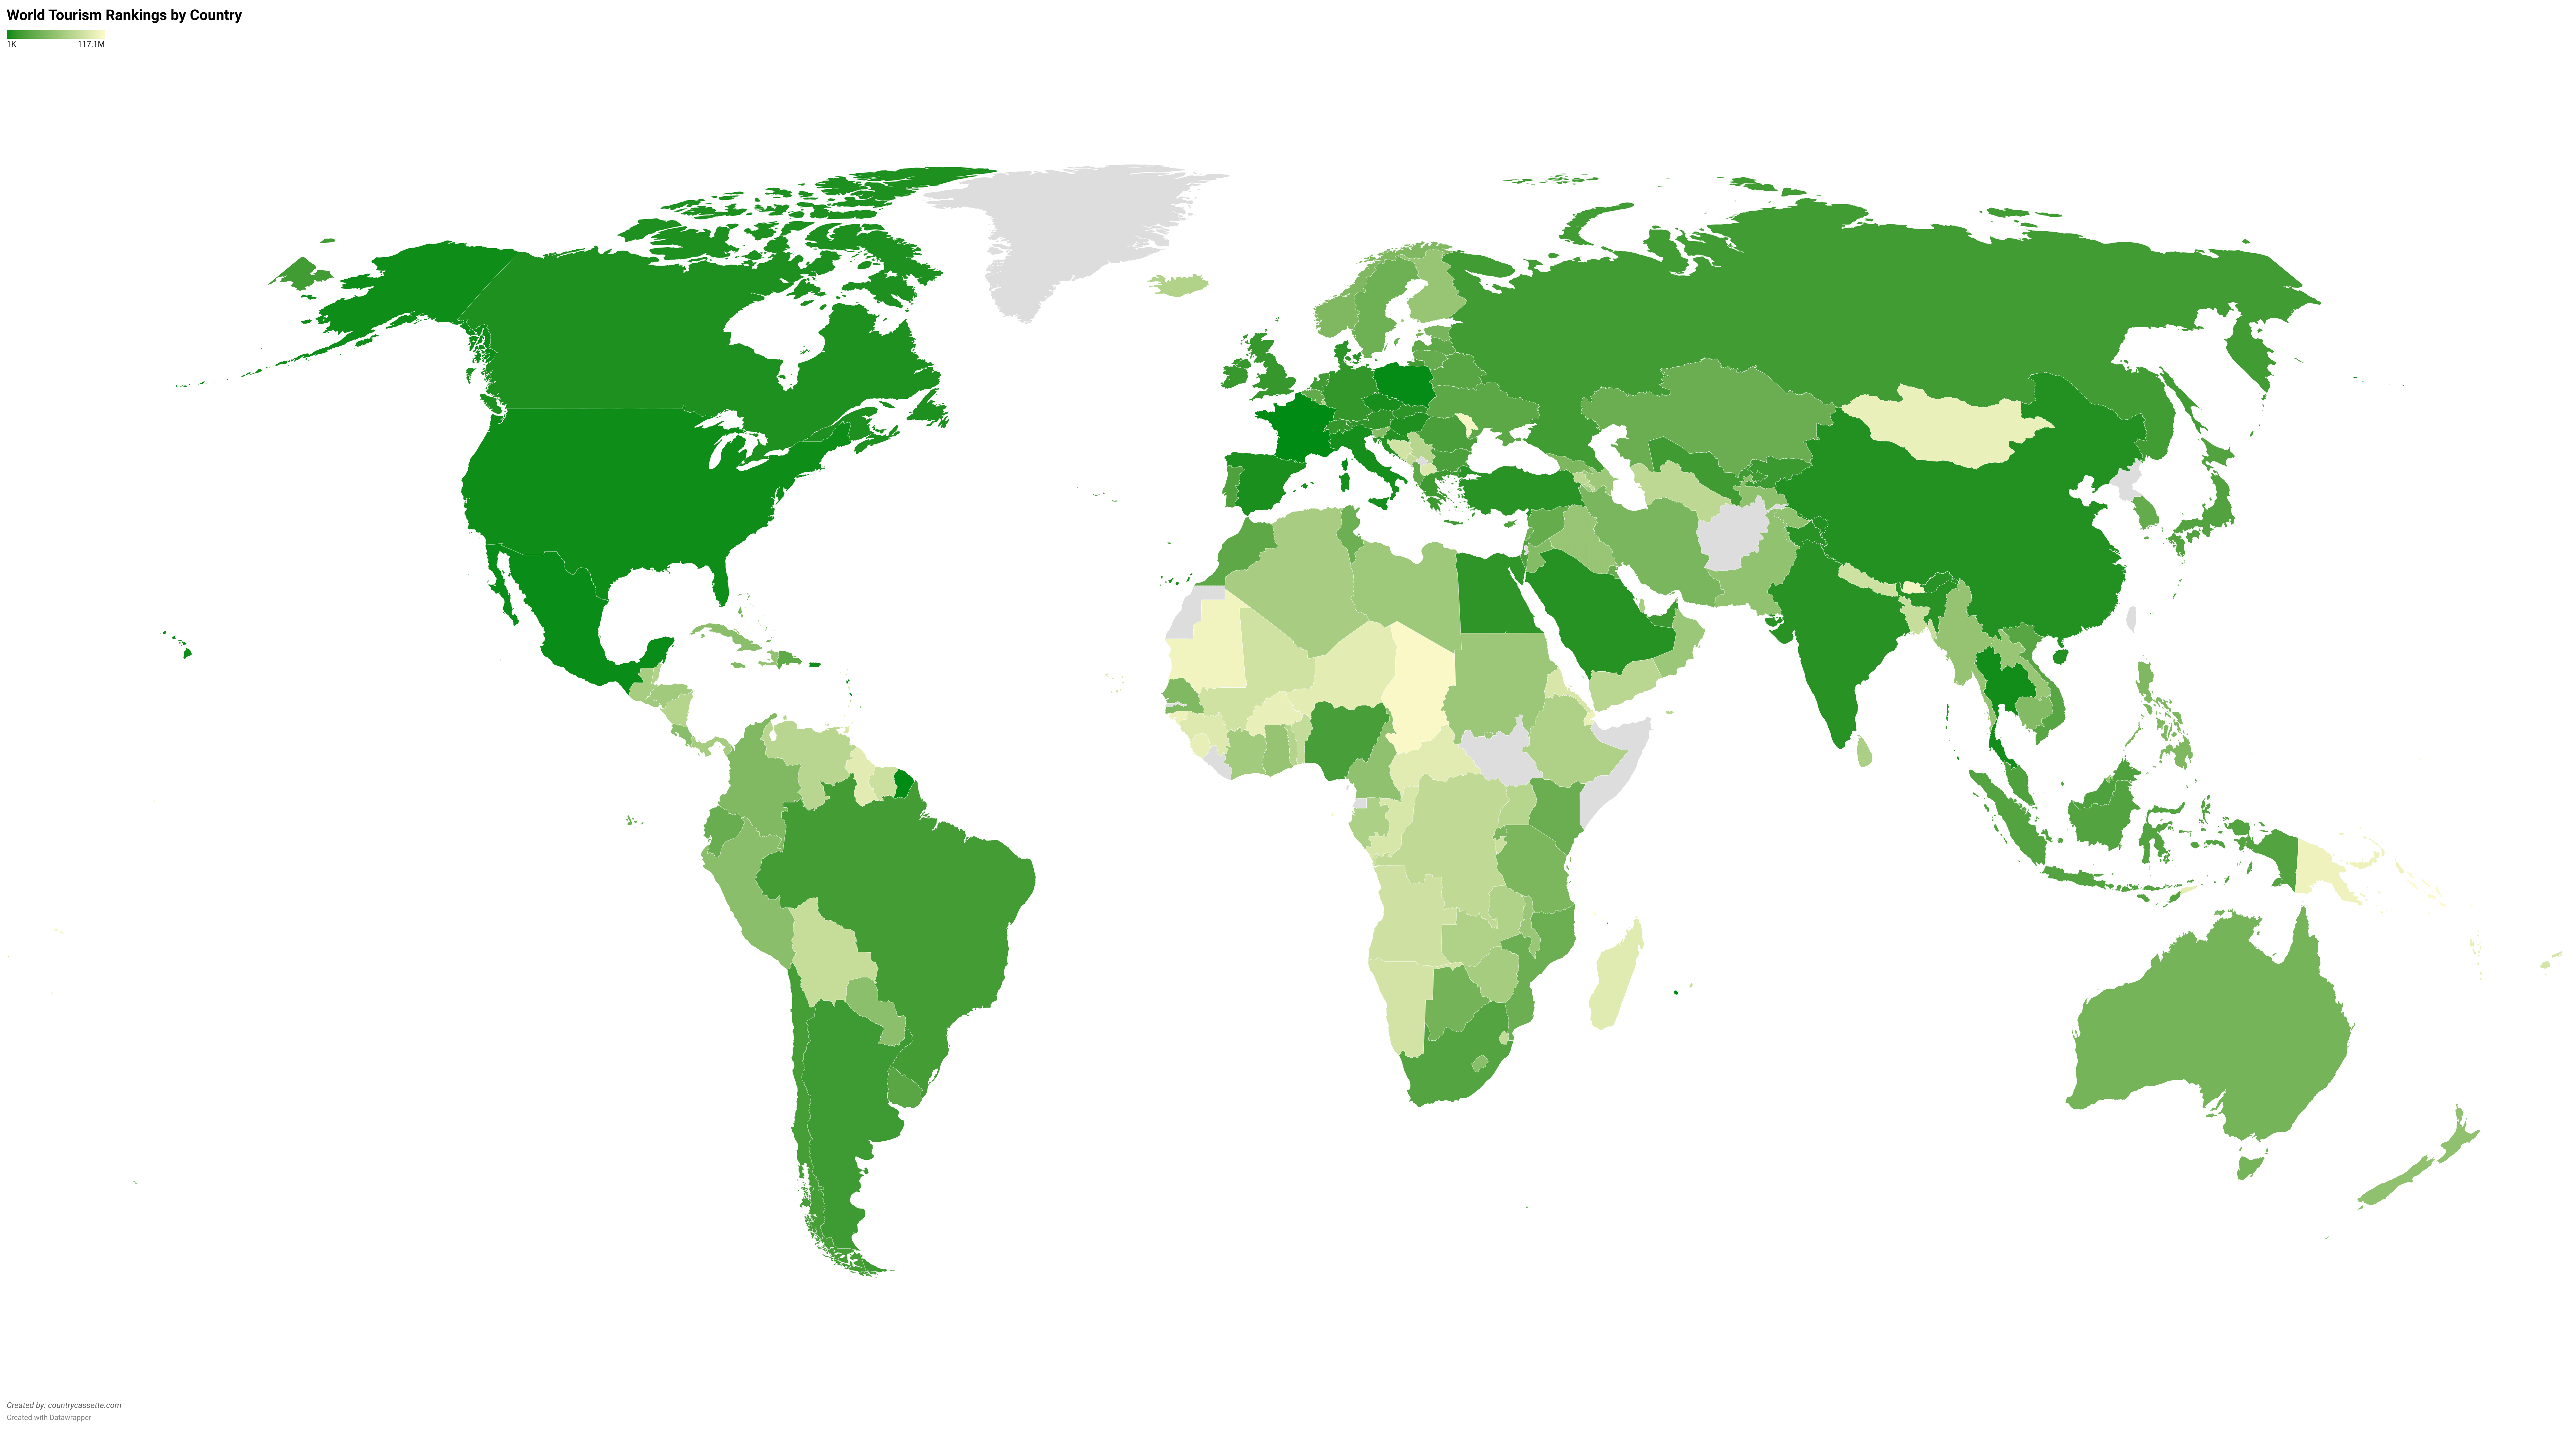 World Tourism Rankings by Country